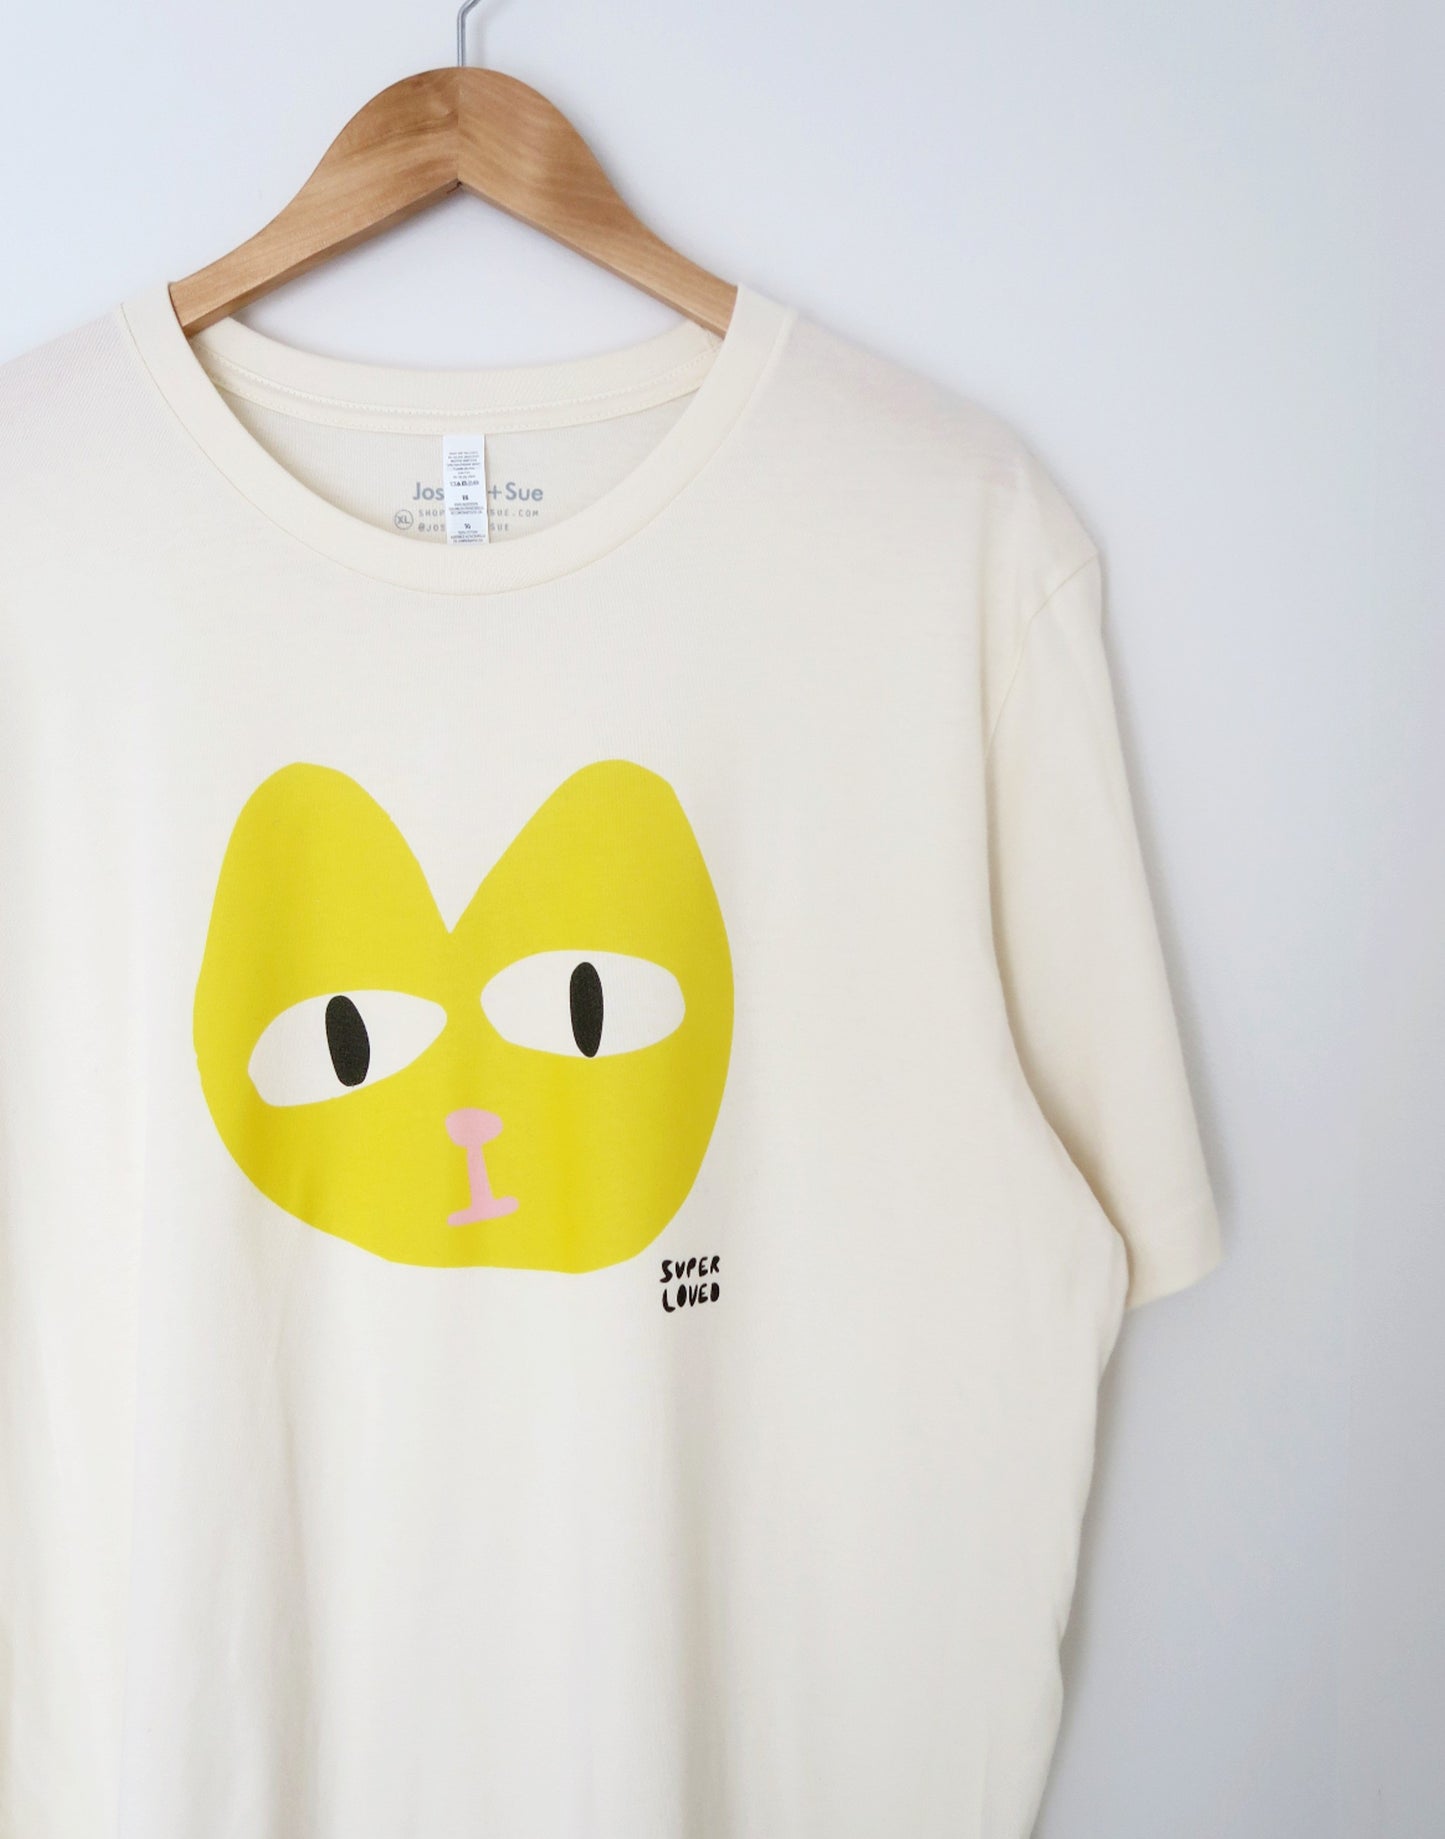 SUPER LOVED, Cat's Meow T-Shirt